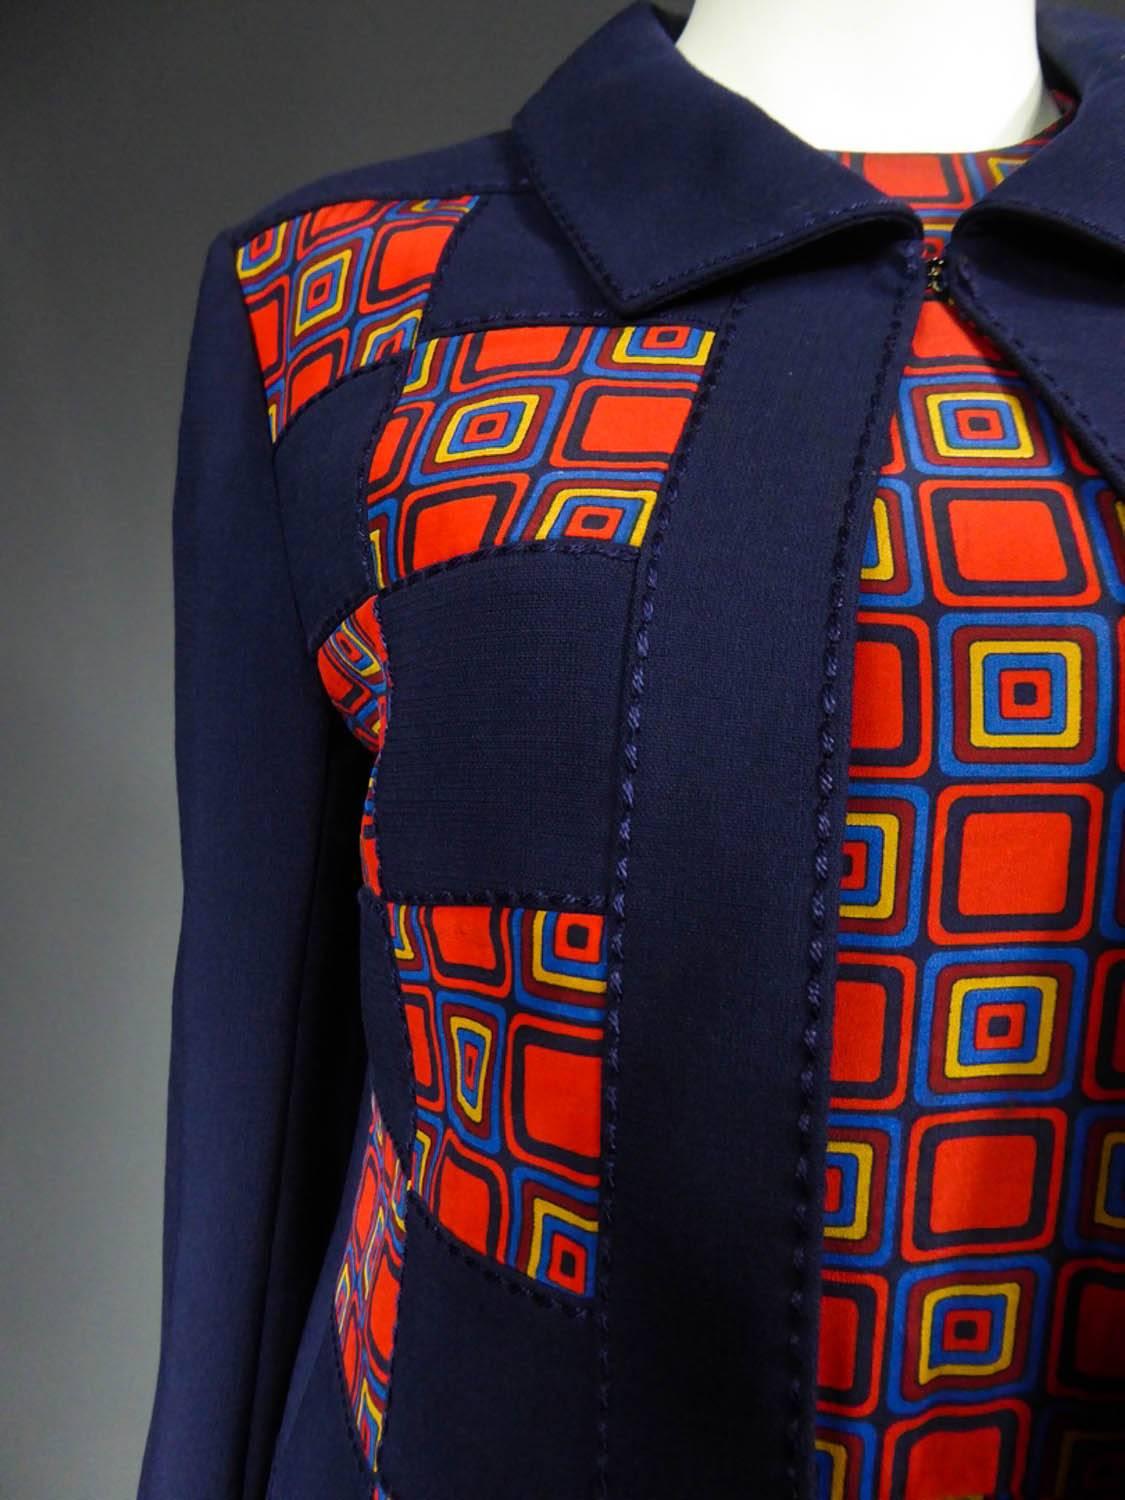 Circa 1972

France

Haute couture set with dress and jacket in navy blue jersey and silk unidentified and dating back to the early 70s. Sleeveless dress, top silk print squared in the Vasarely taste, skirt with deep pleats.Checkered effect jacket